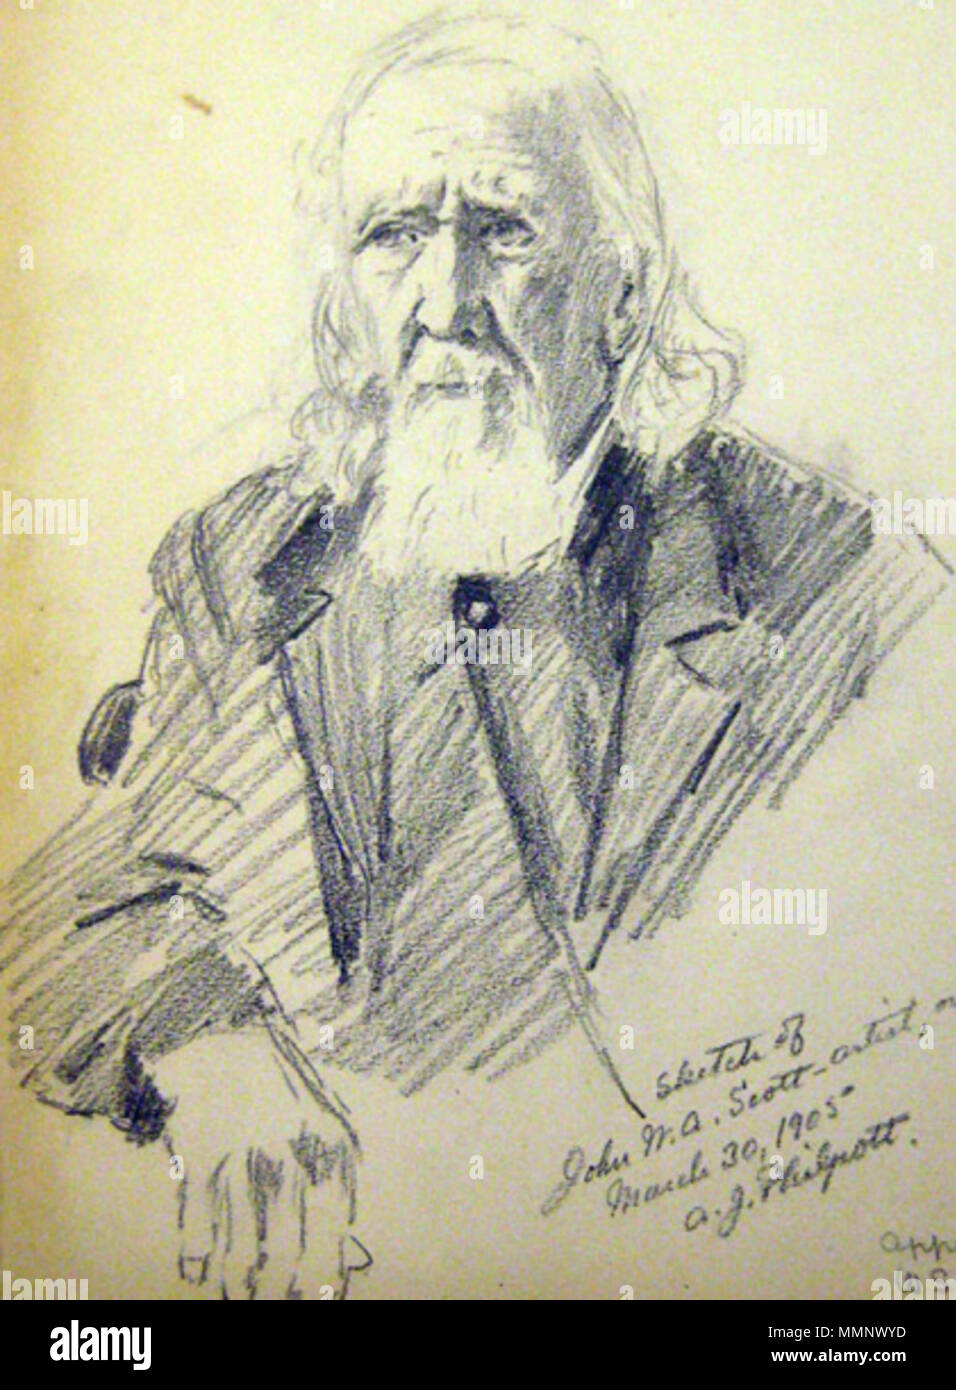 . 'Philpott, A.J. [Portrait of John W.A. Scott]; Pencil. (9 ¾ x 7 5/8 in) (25 x 19 ½ cm). March 30, 1905. ... The image is signed in the lower right “sketch of John W.A. Scott – artist, over 90. March 30, 1905 A.J. Philpott.” Notation at bottom reads: “Apprentice to W.S. Pendleton.”'--American Antiquarian Society drawings inventory 12 1905 JohnWAScott byAJPhilpott AmericanAntiquarianSociety Stock Photo